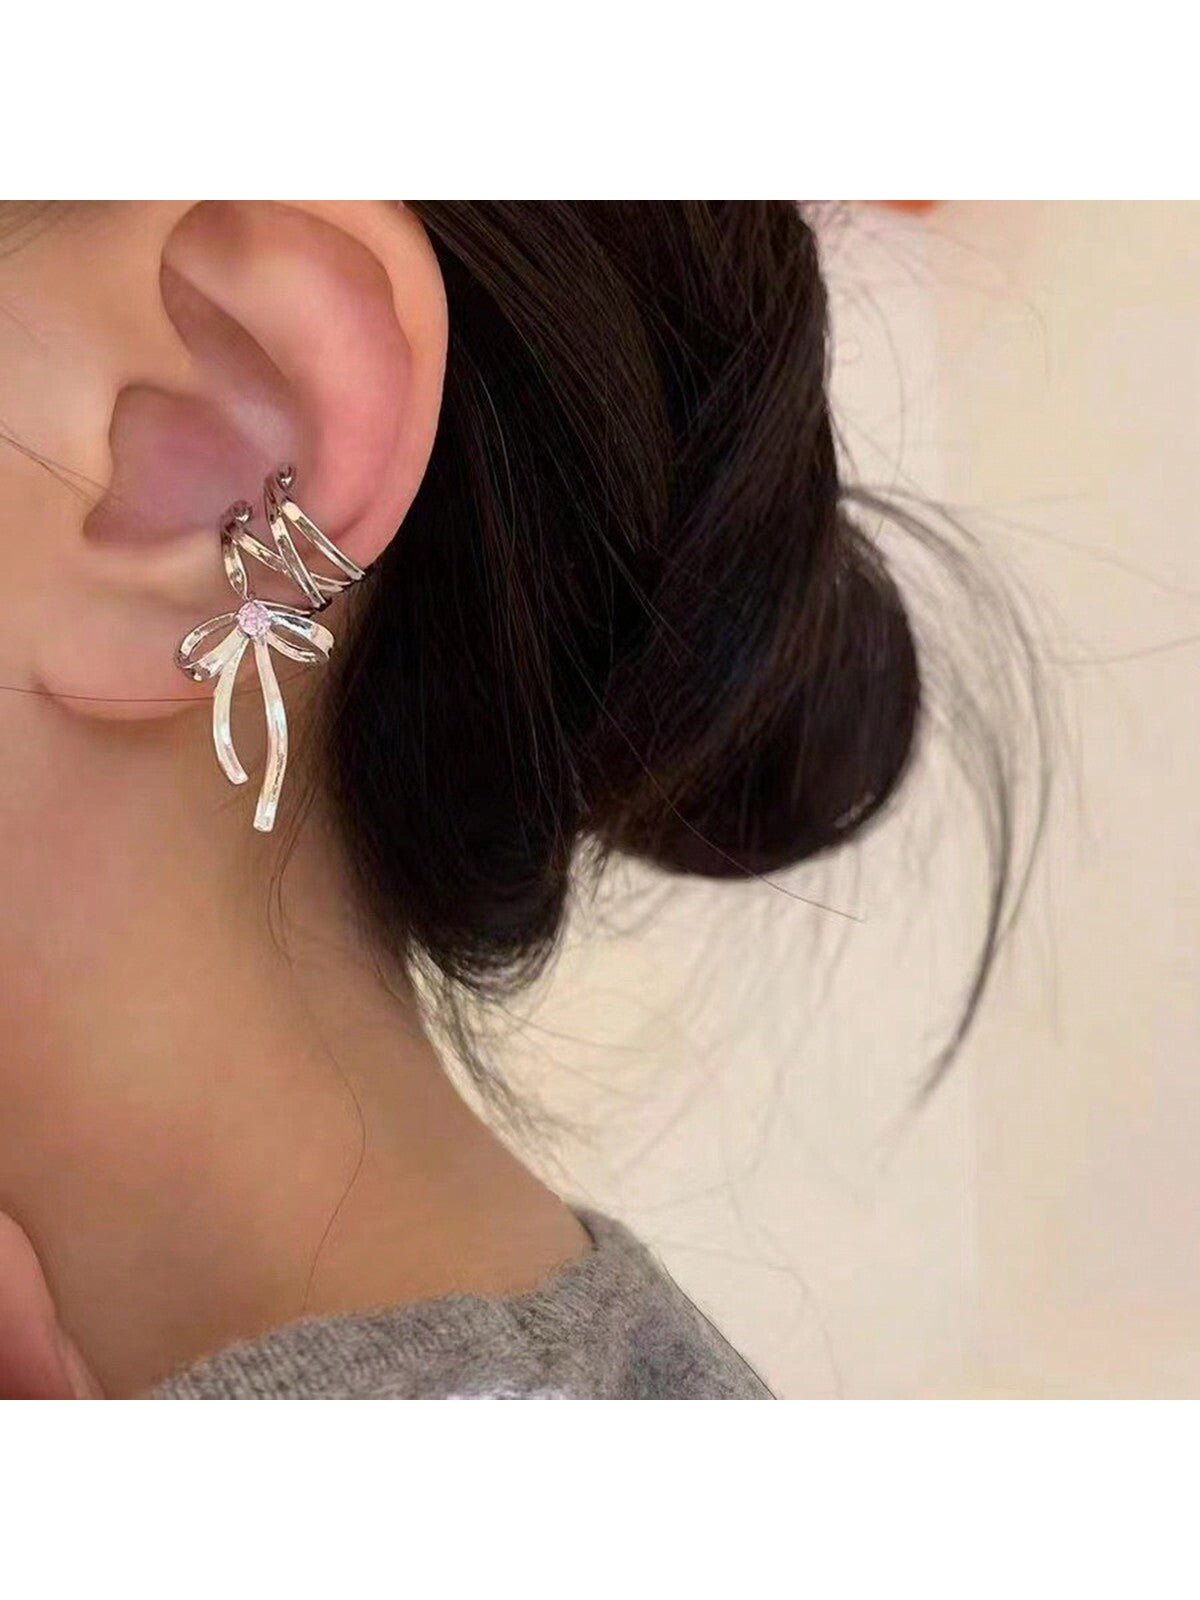 Ribbon Aesthetics|New Hollow Cross Ear Cuff With Cool Ballet Style Ribbon Bow Earrings For Women, 2pcs - Negative Apparel